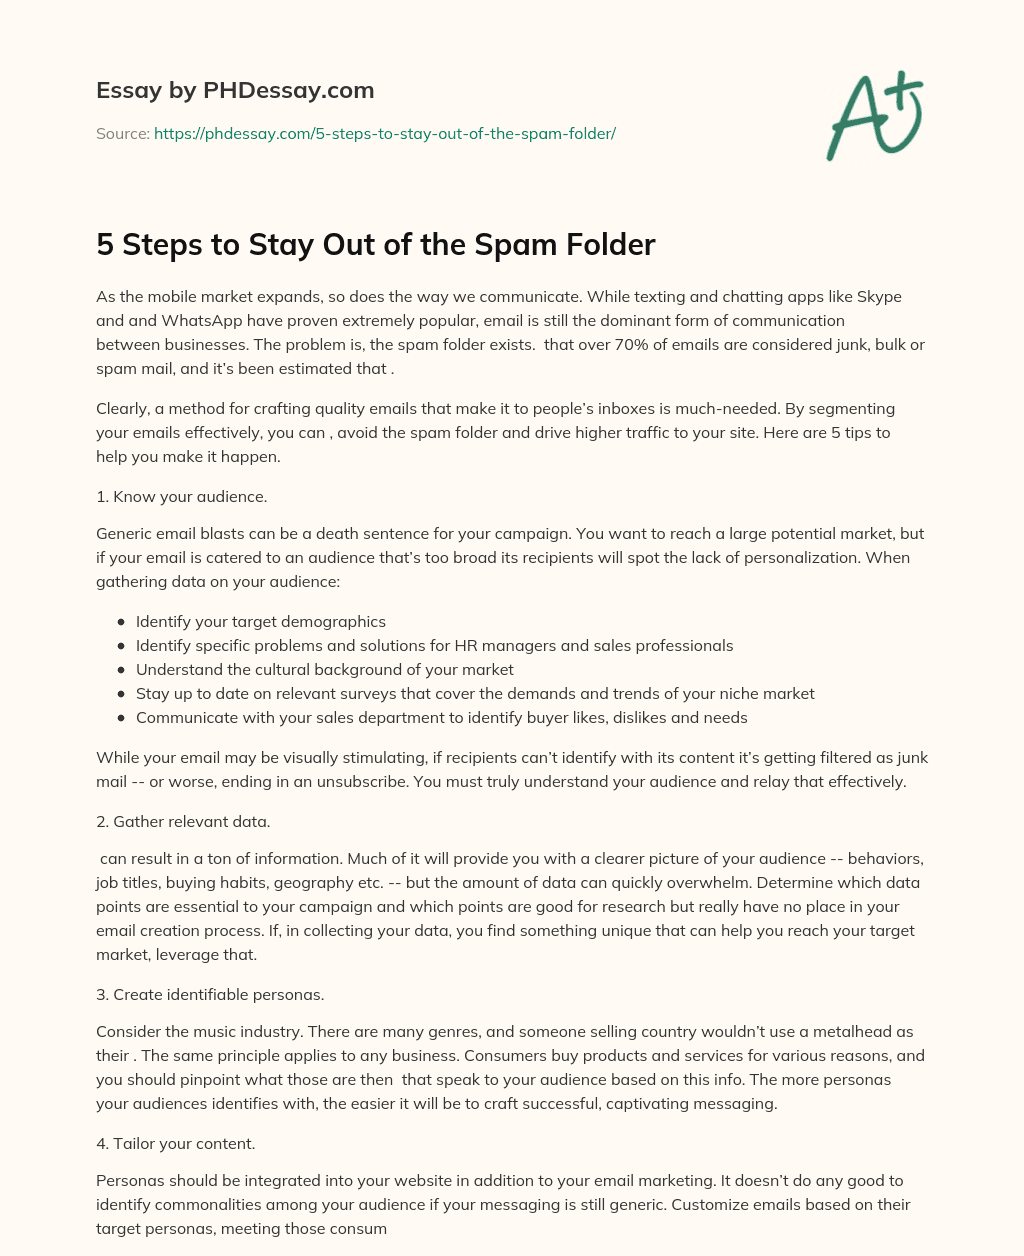 5 Steps to Stay Out of the Spam Folder essay